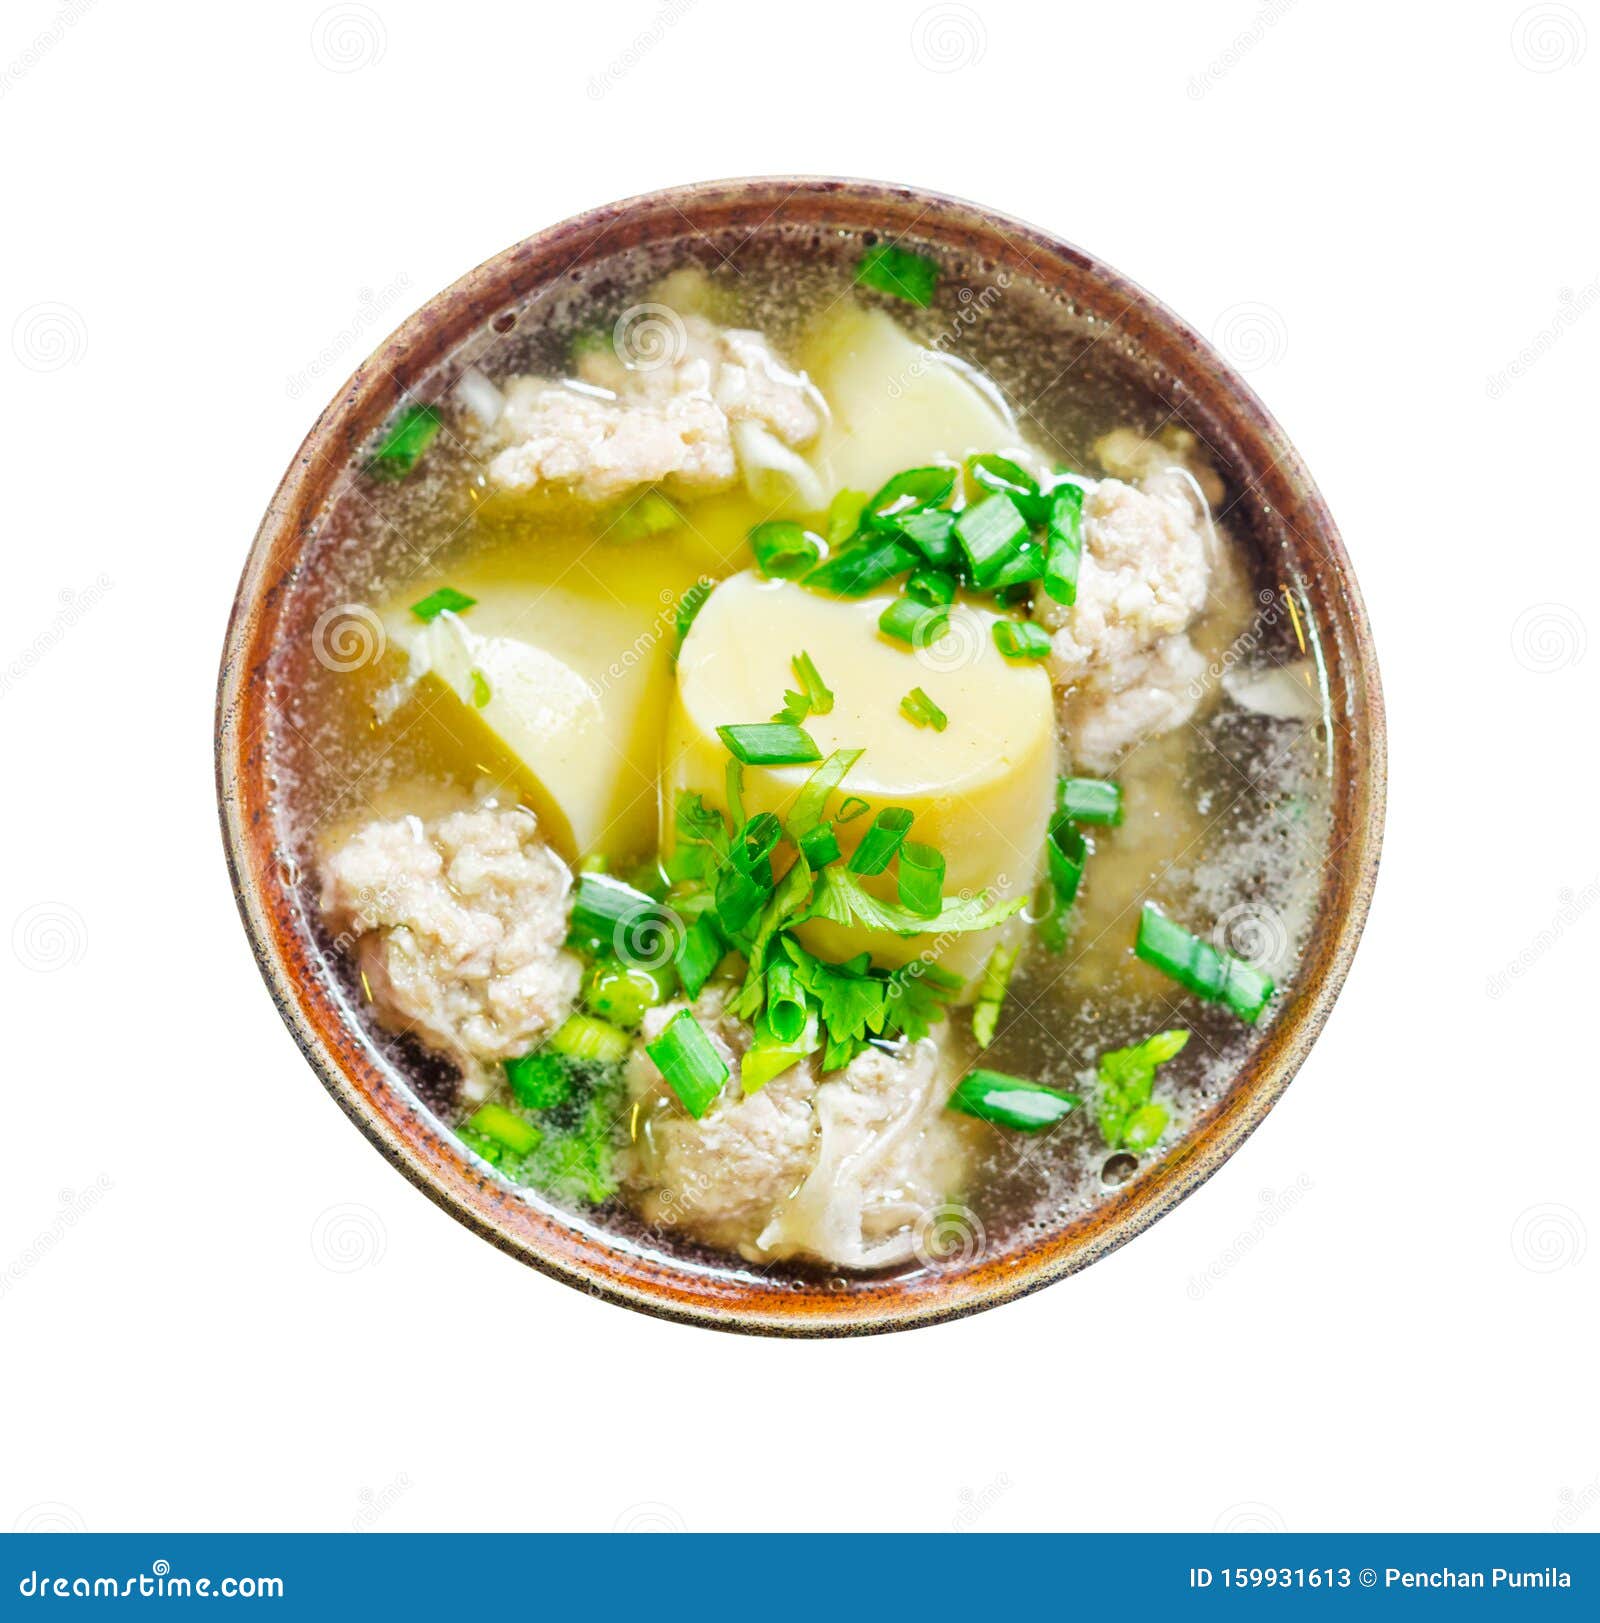 Soup Pot With Clipping Path Stock Photo - Download Image Now